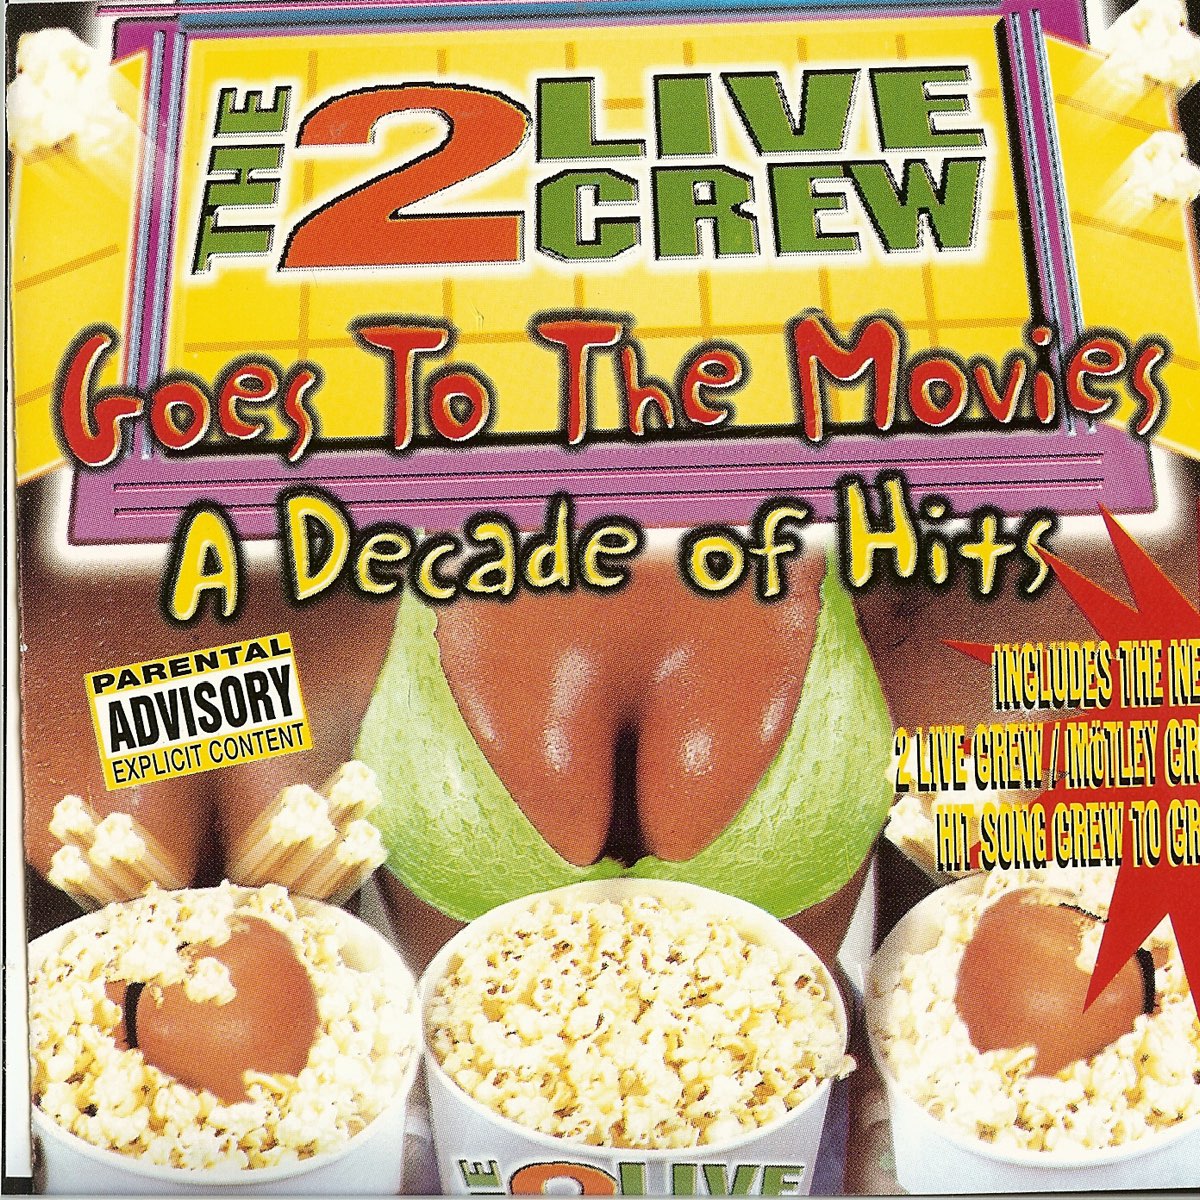 Goes to the Movies-A Decade of Hits artistilta The 2 Live Crew.